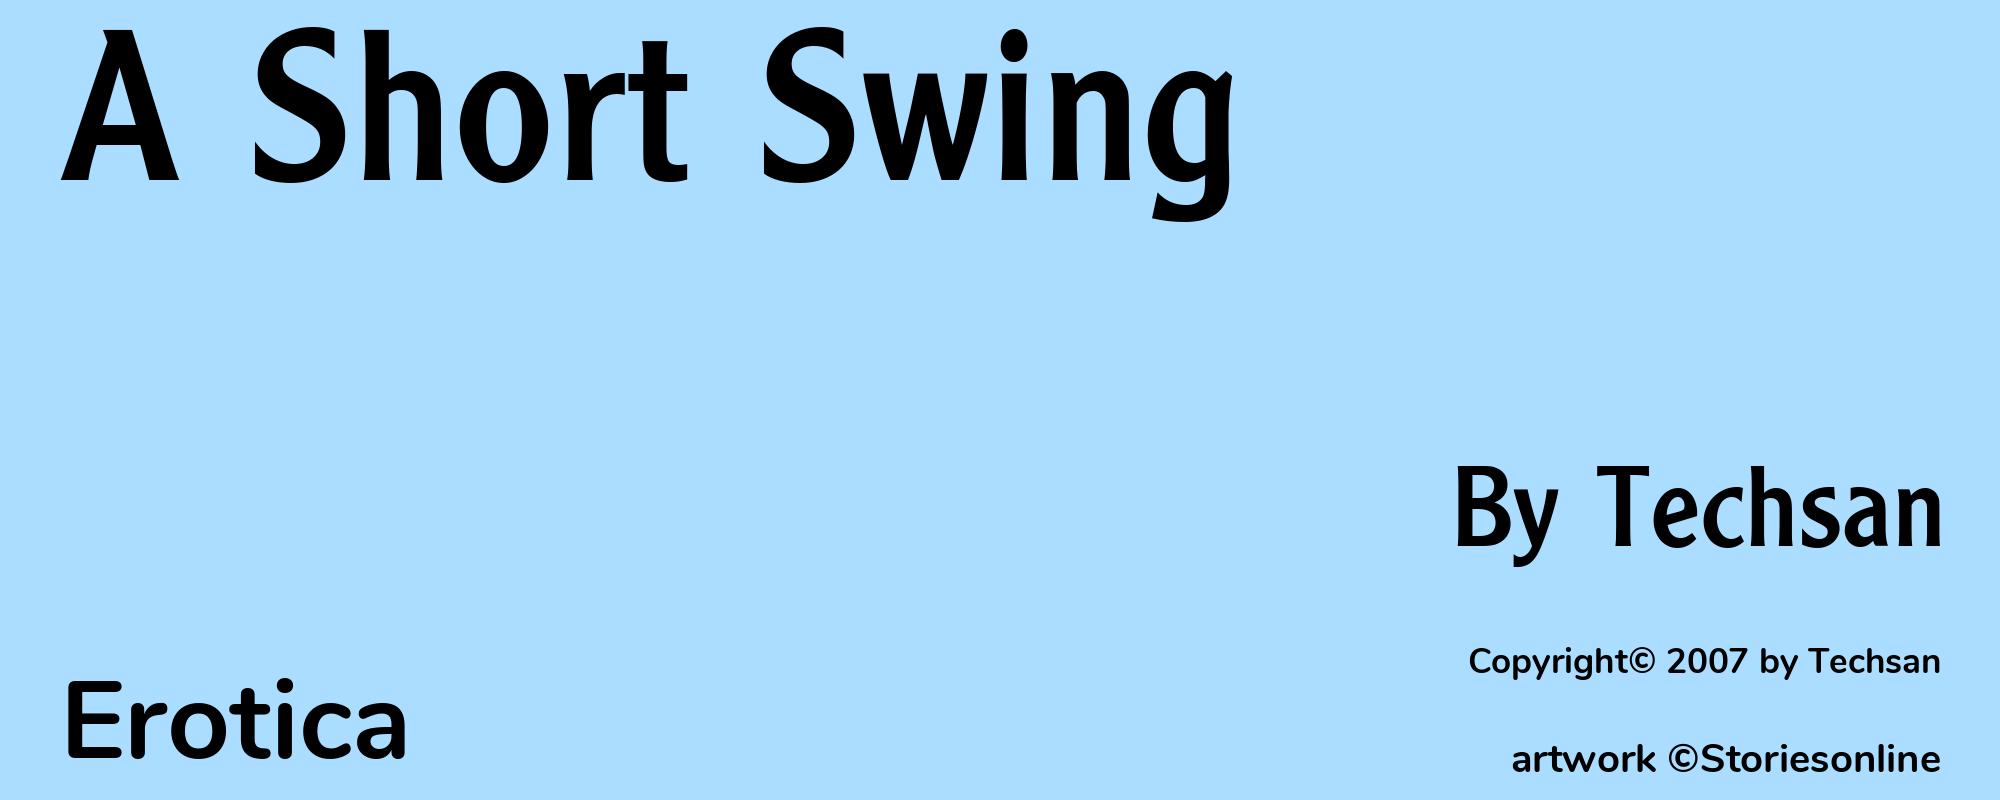 A Short Swing - Cover